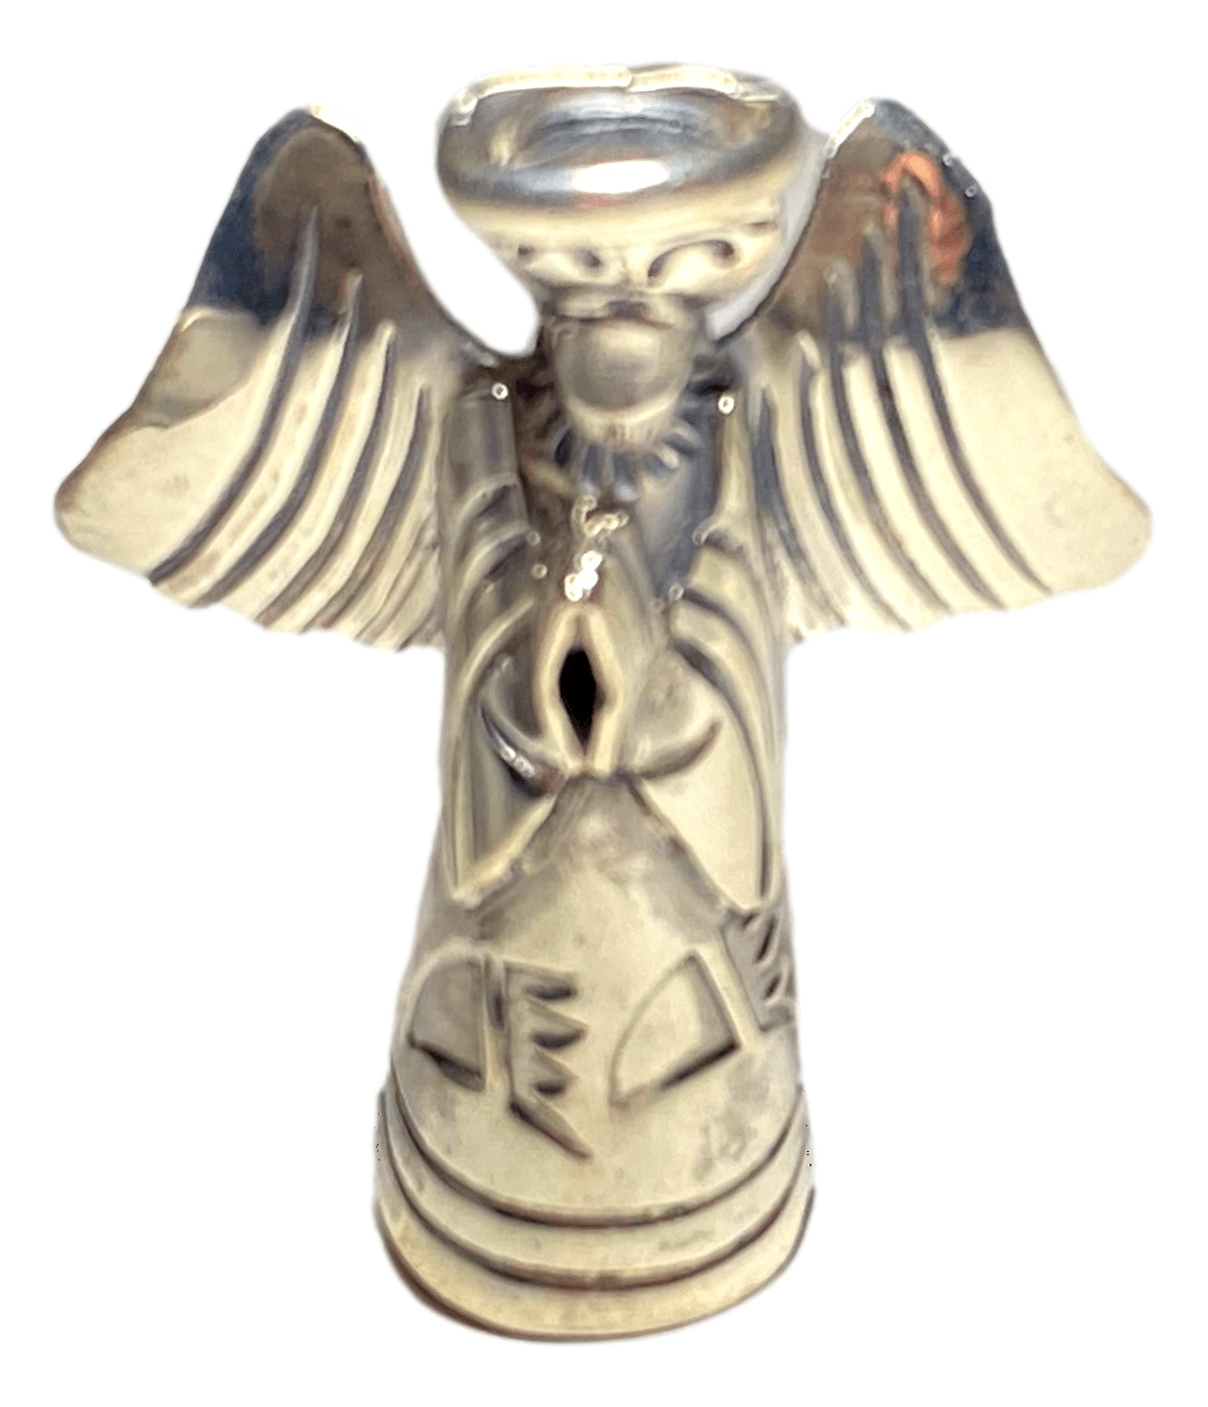 Lapel Pin Angel Praying Sterling Silver 1 1/2 inches Handcrafted By Native American Artisans Stamped - Ysleta Mission Gift Shop- VOTED El Paso's Best Gift Shop